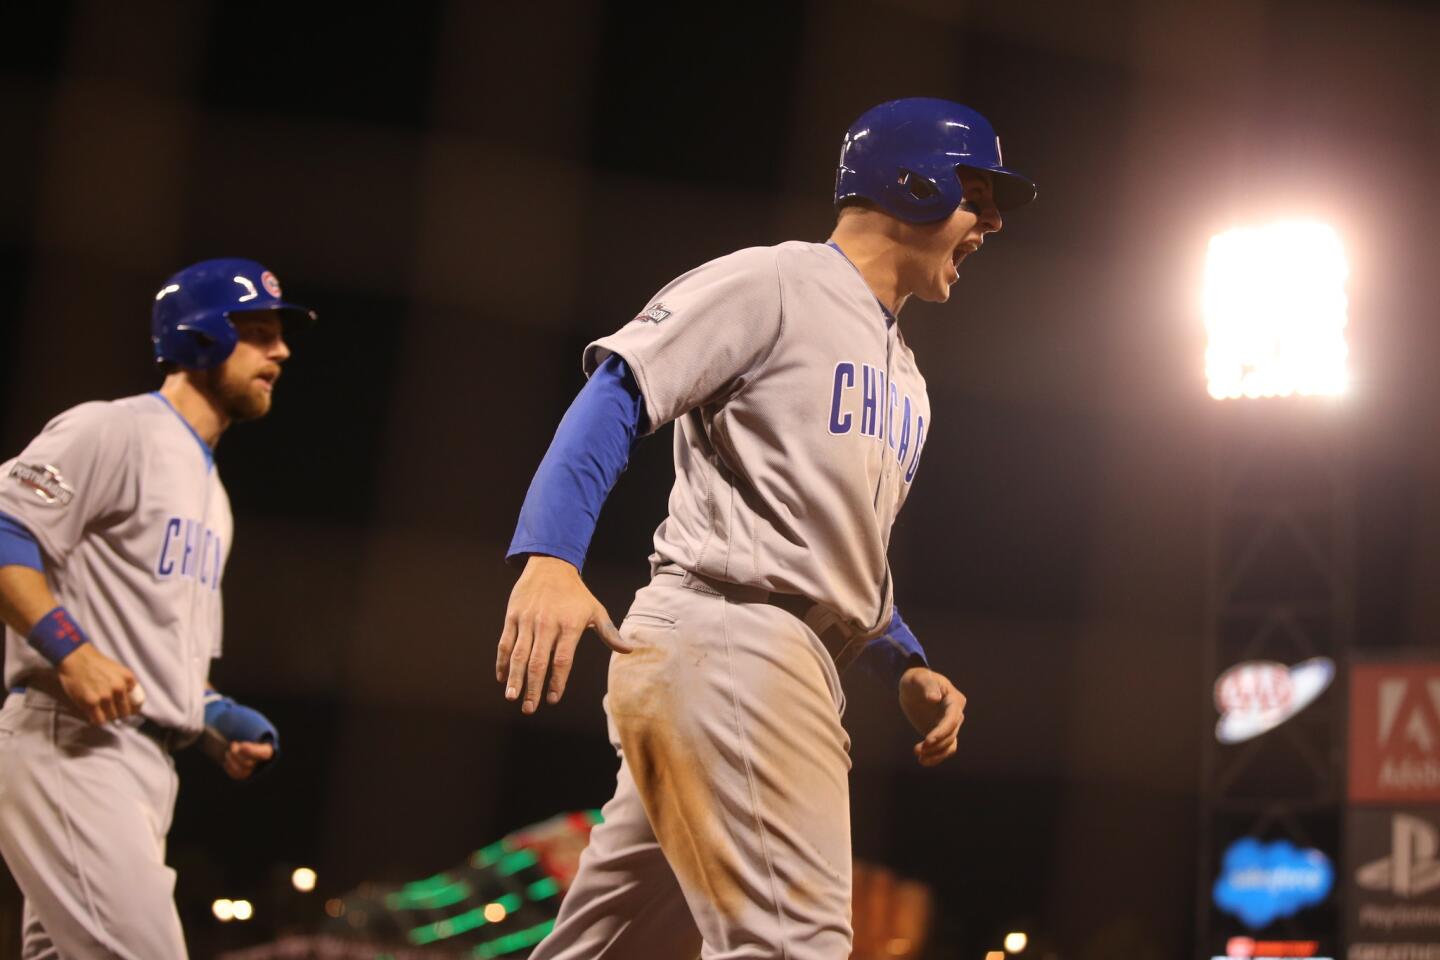 ct-cubs-giants-game4-nlds-photos-019